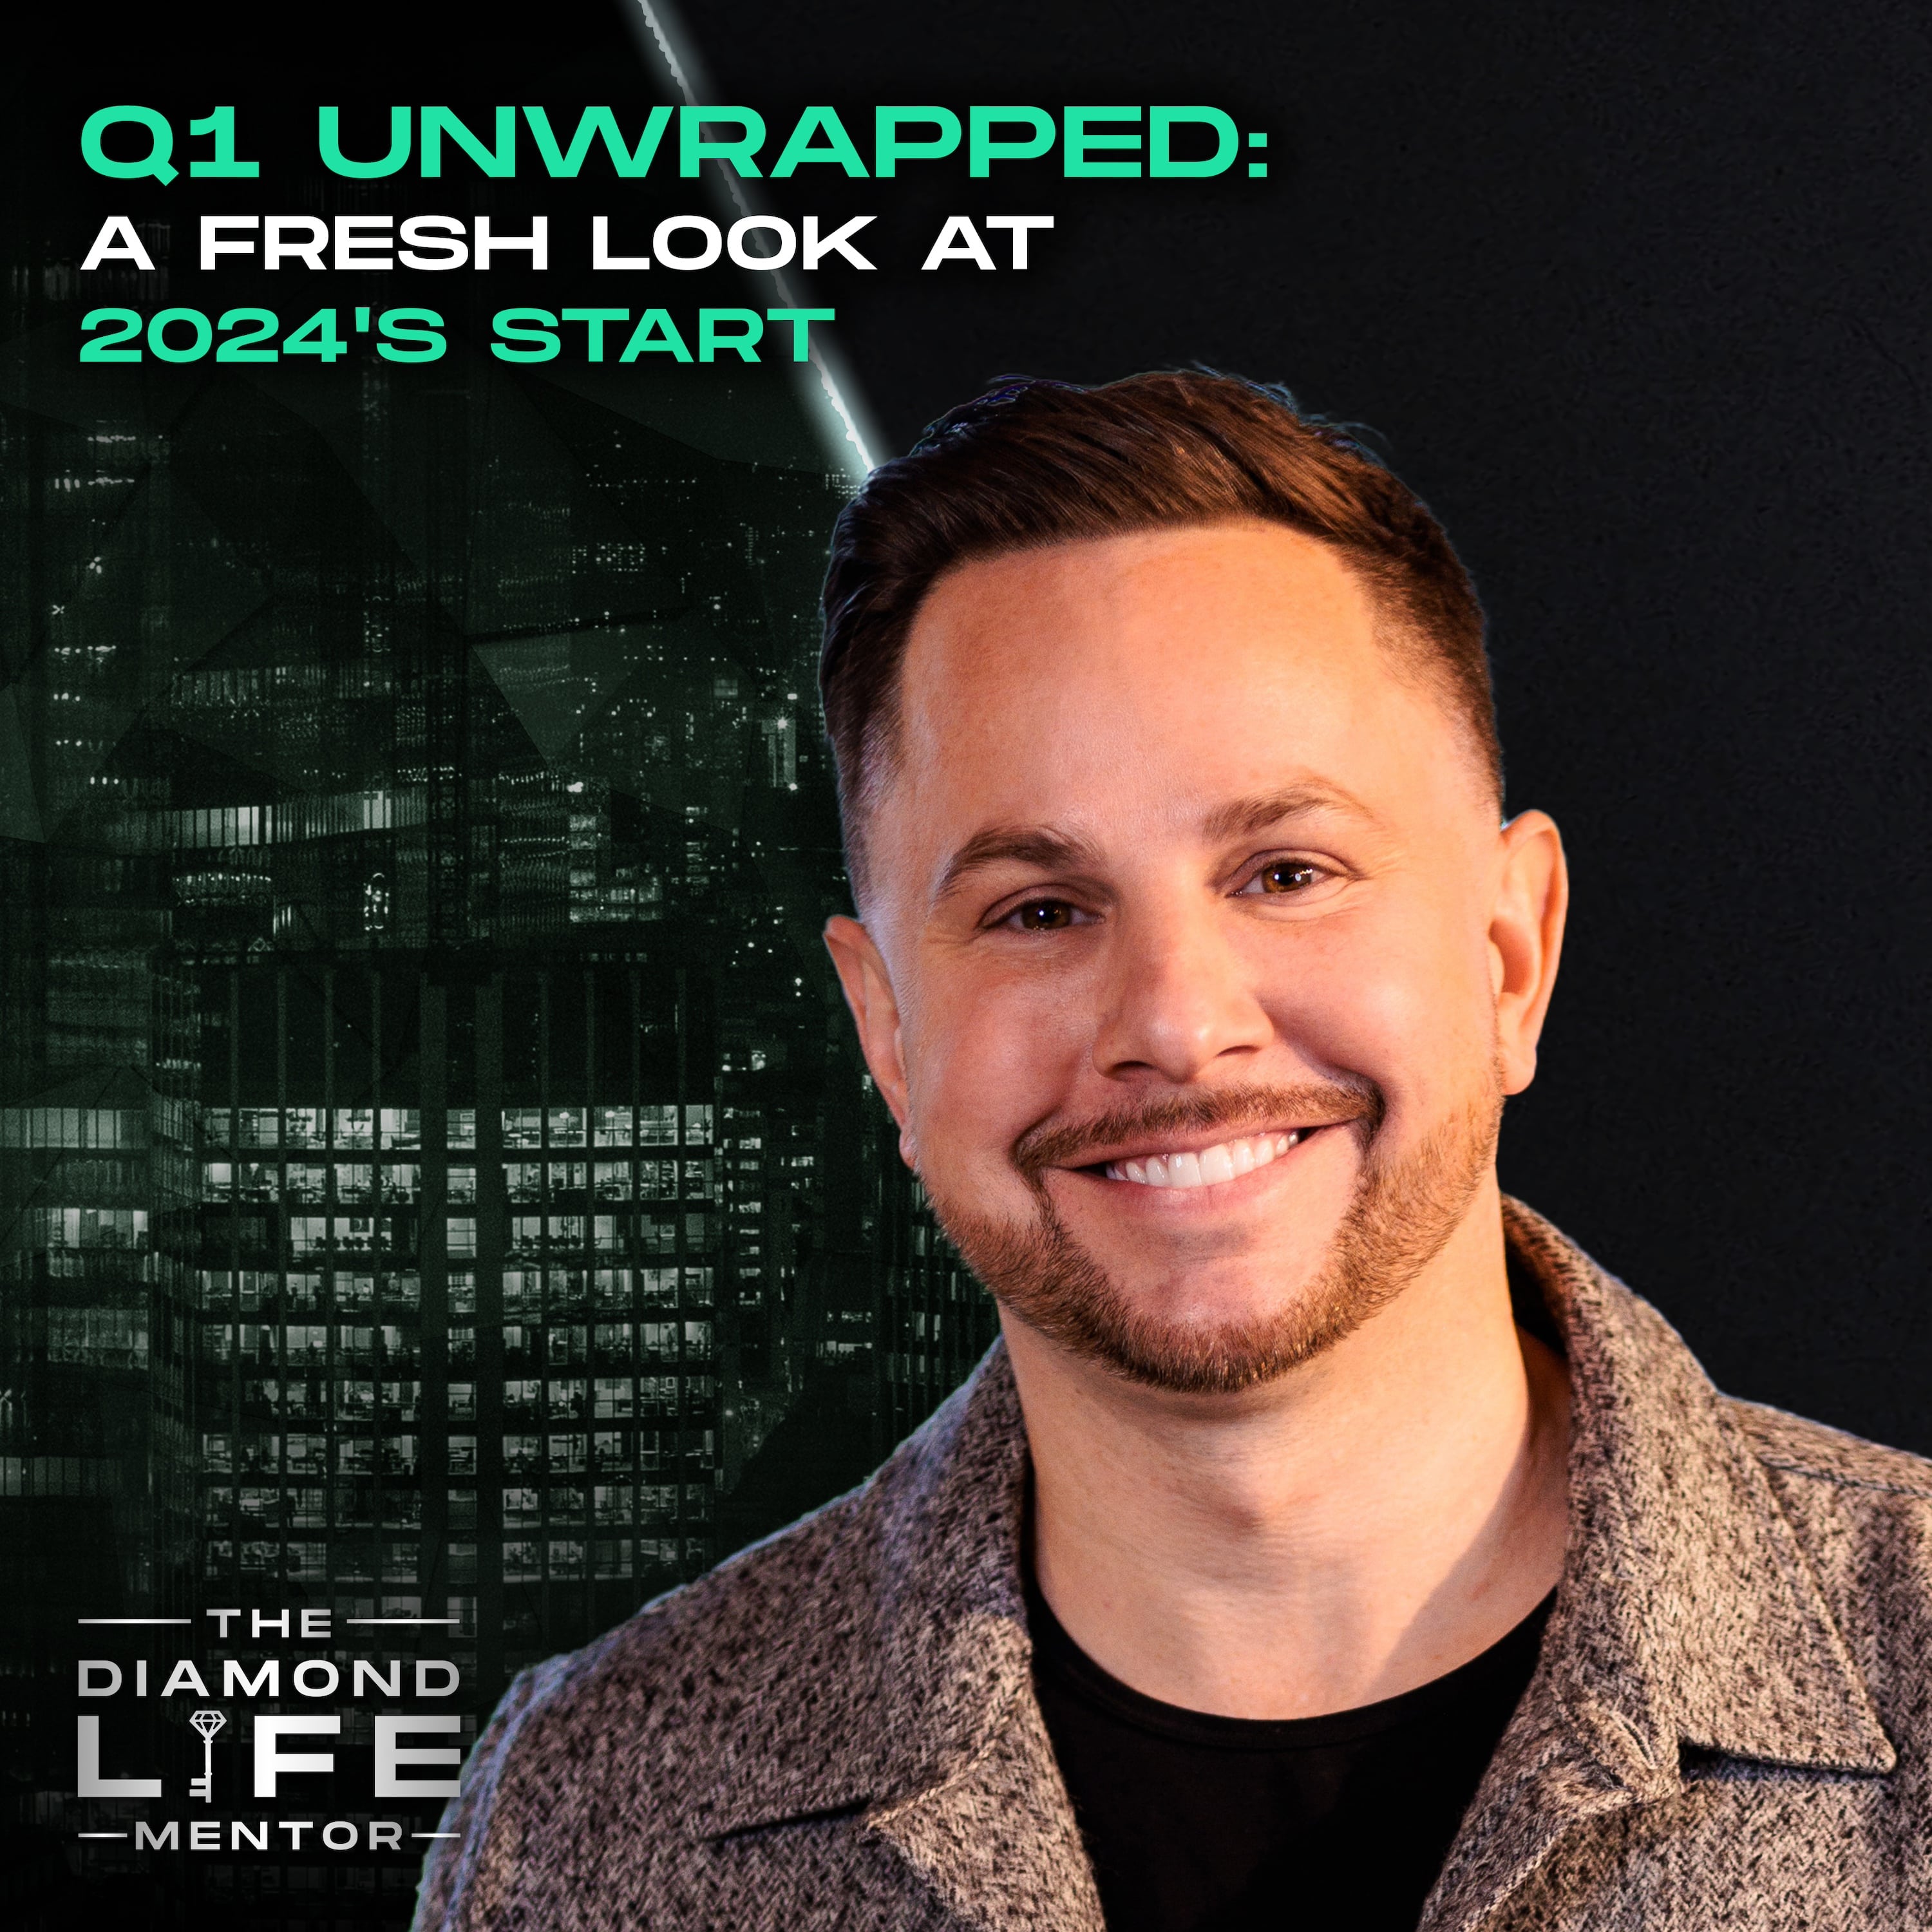 Q1 Unwrapped: A Fresh Look at 2024’s Start